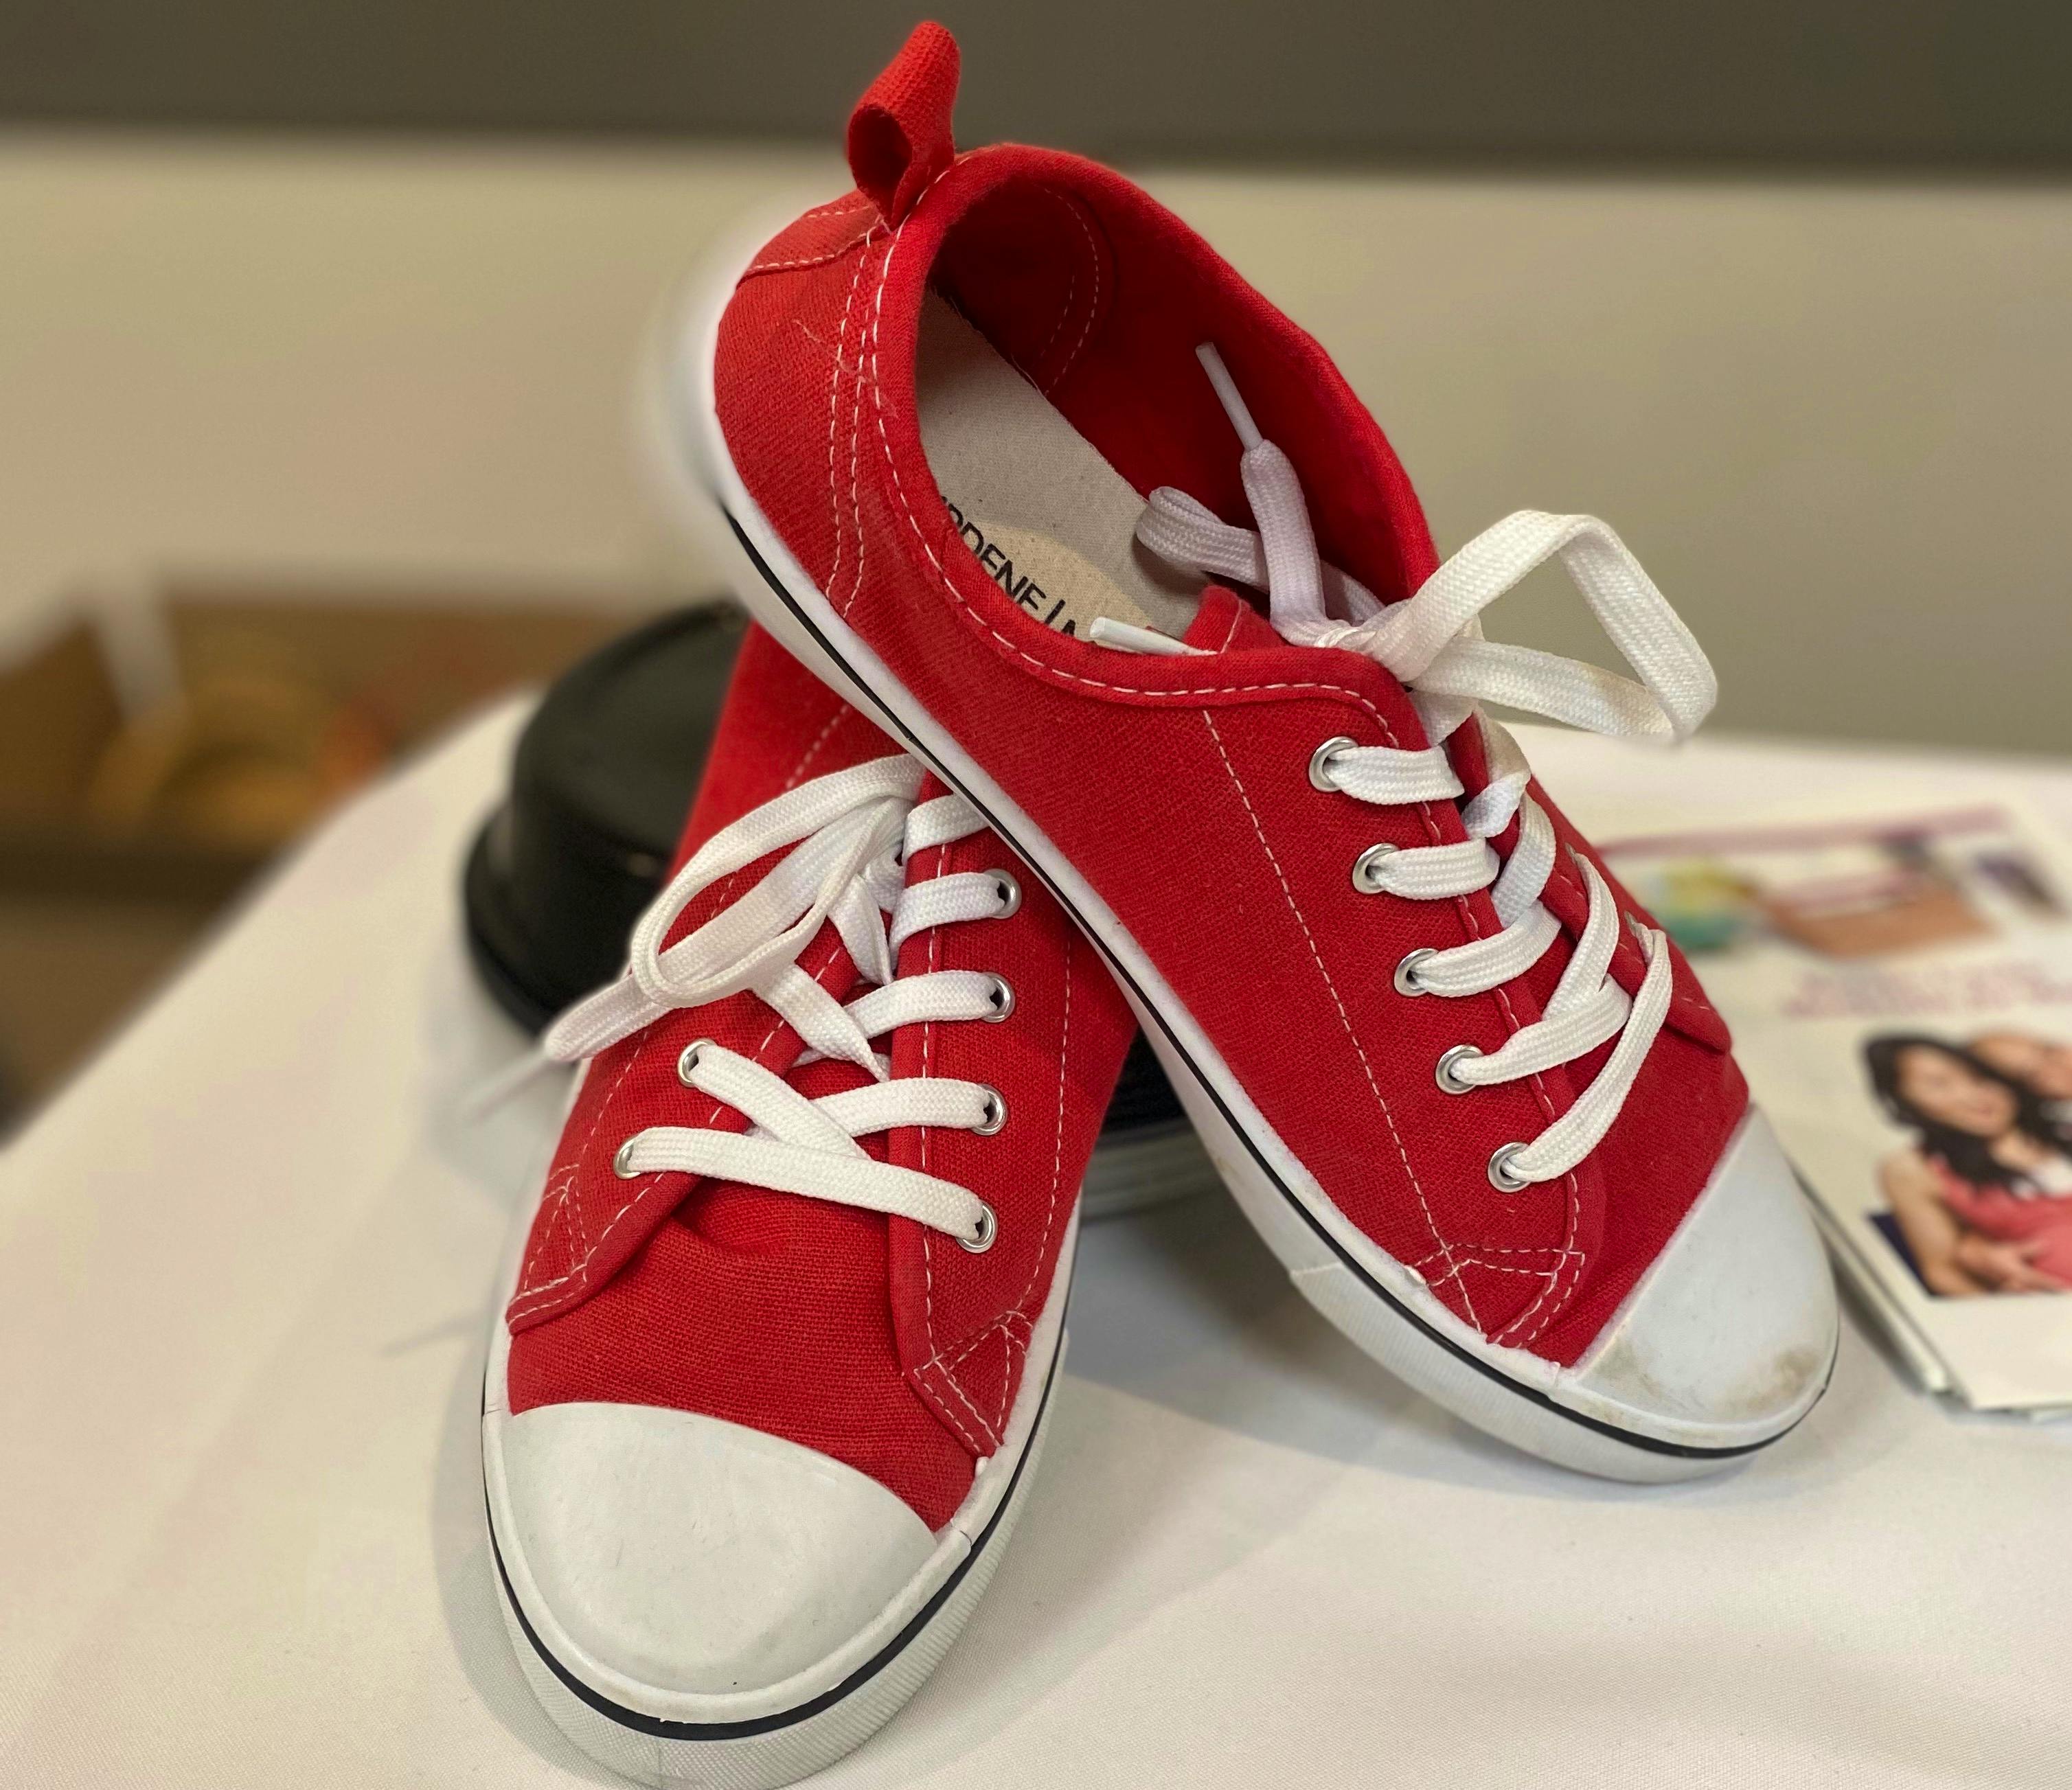 Why Red Shoes? - CanFASD